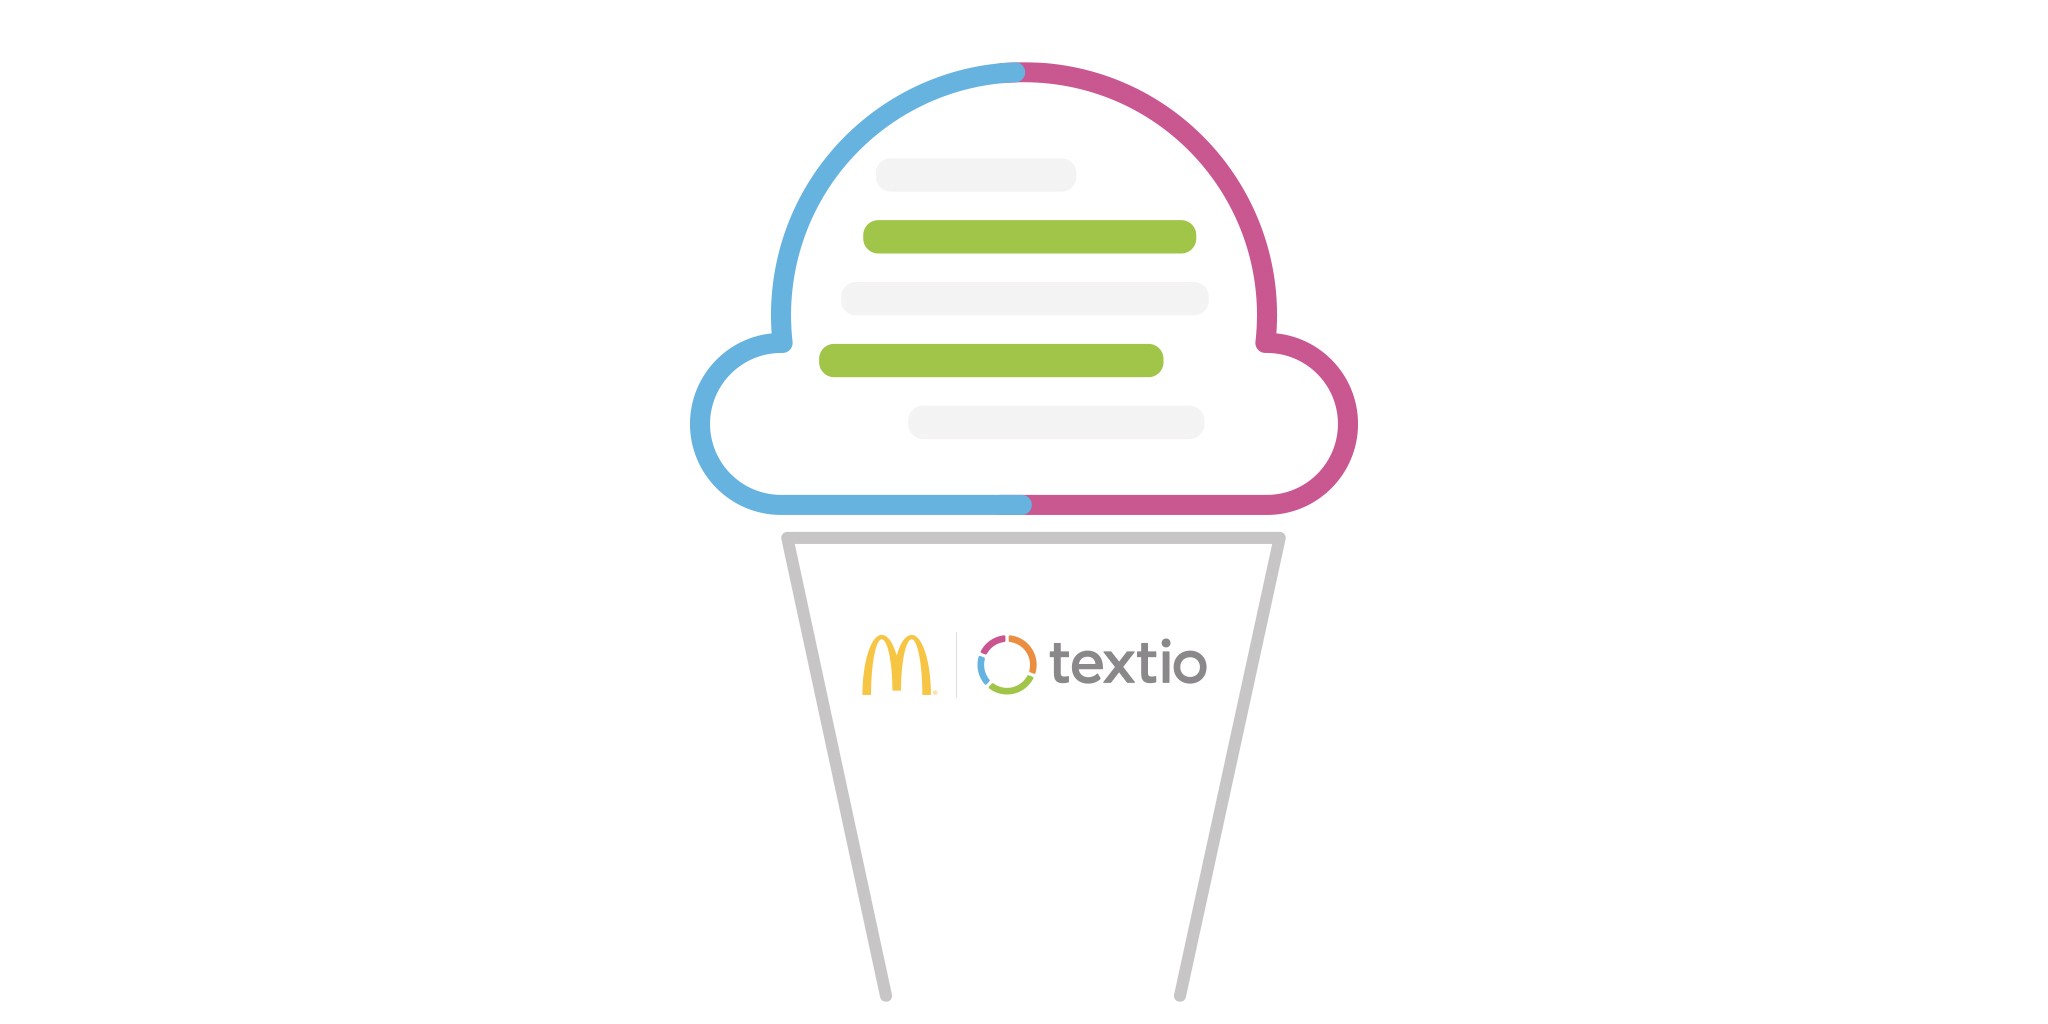 A stylized ice cream cone with Textio and McDonalds logos